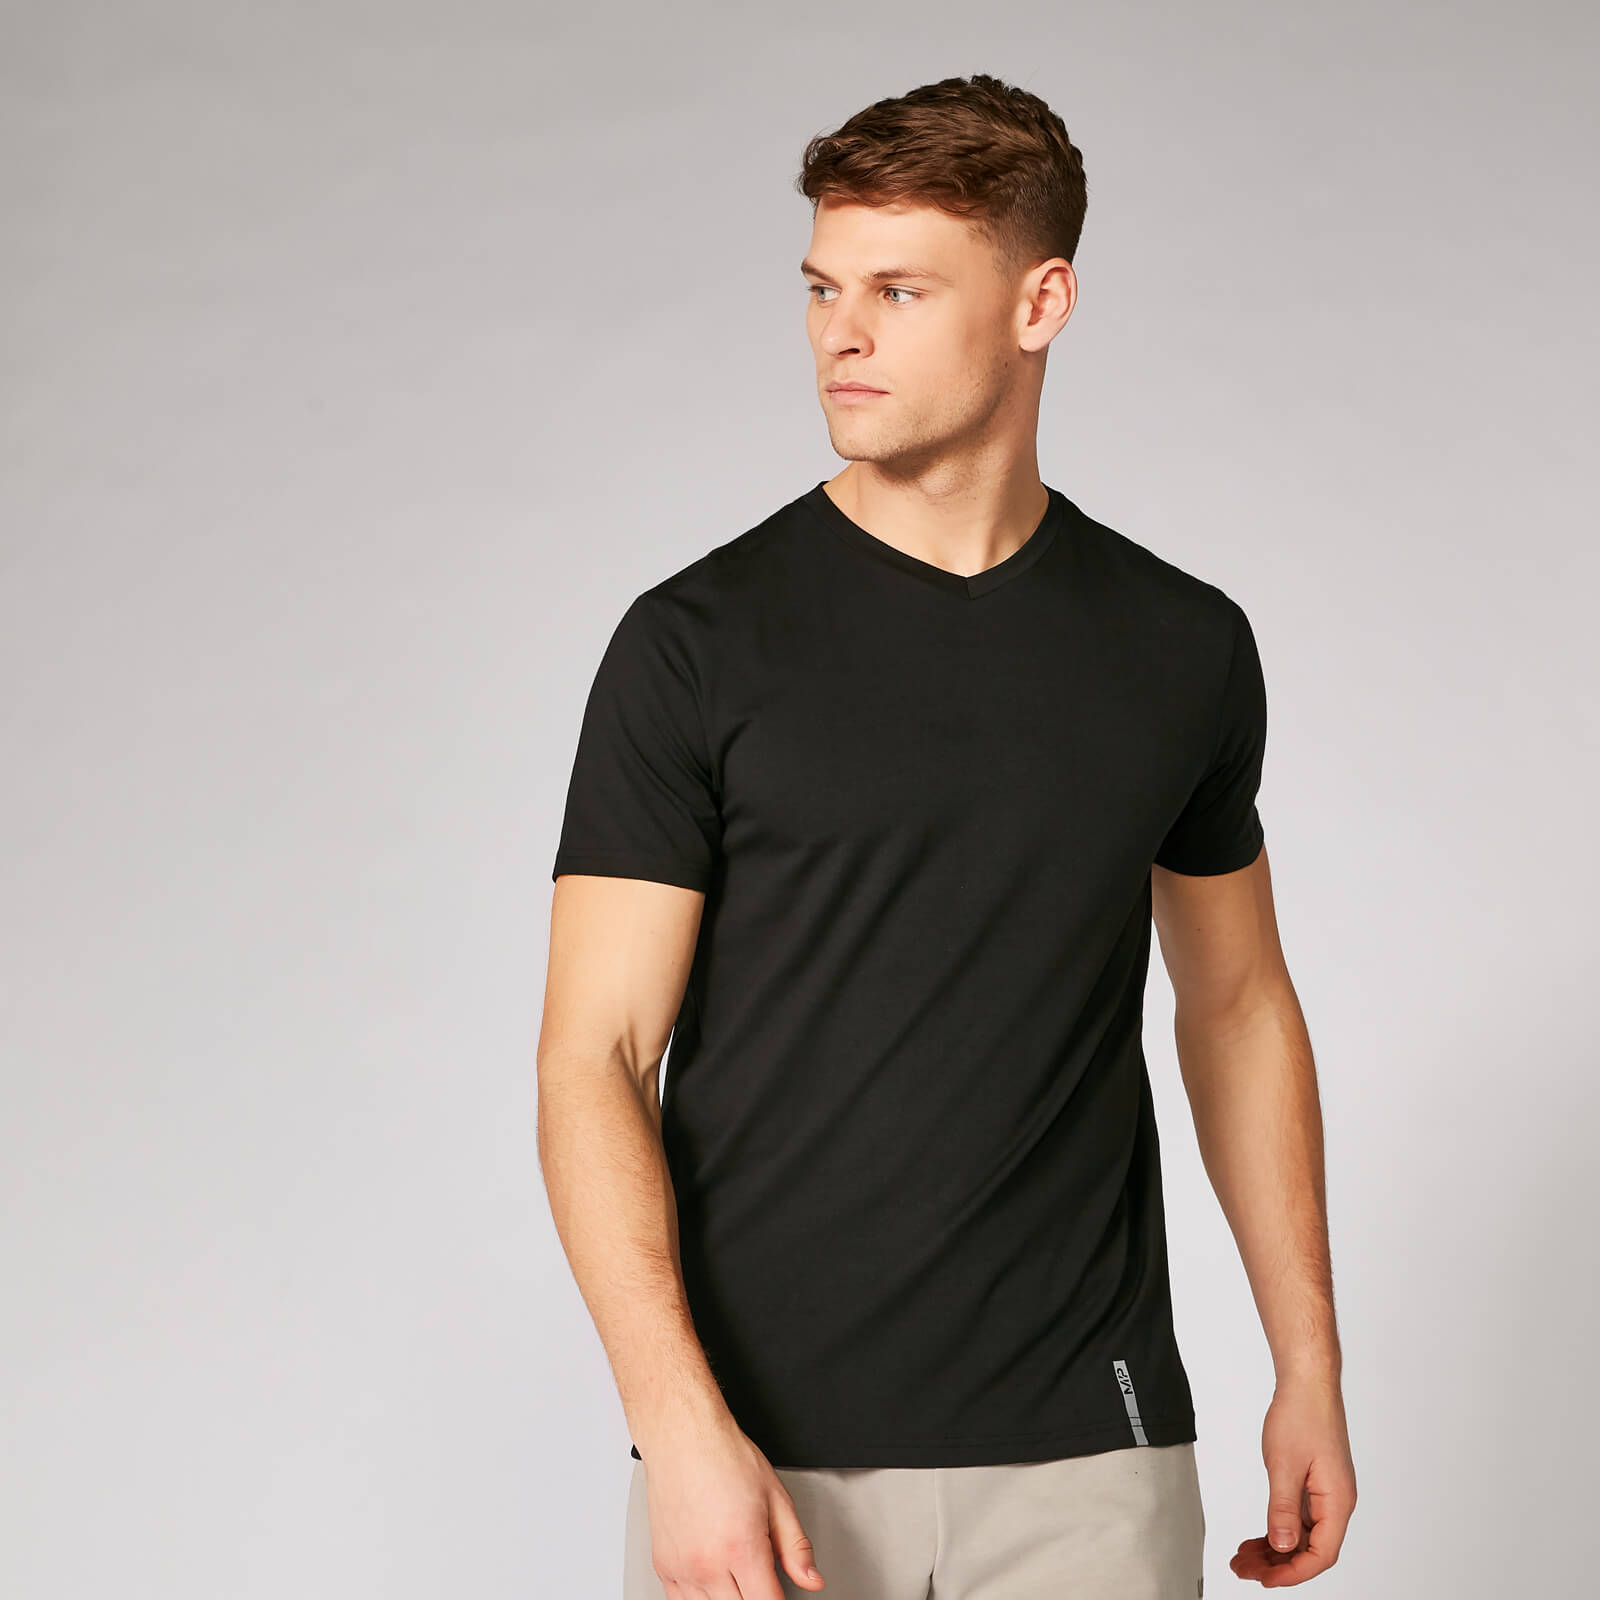 Luxe Classic V-Neck T-Shirt - Black - S